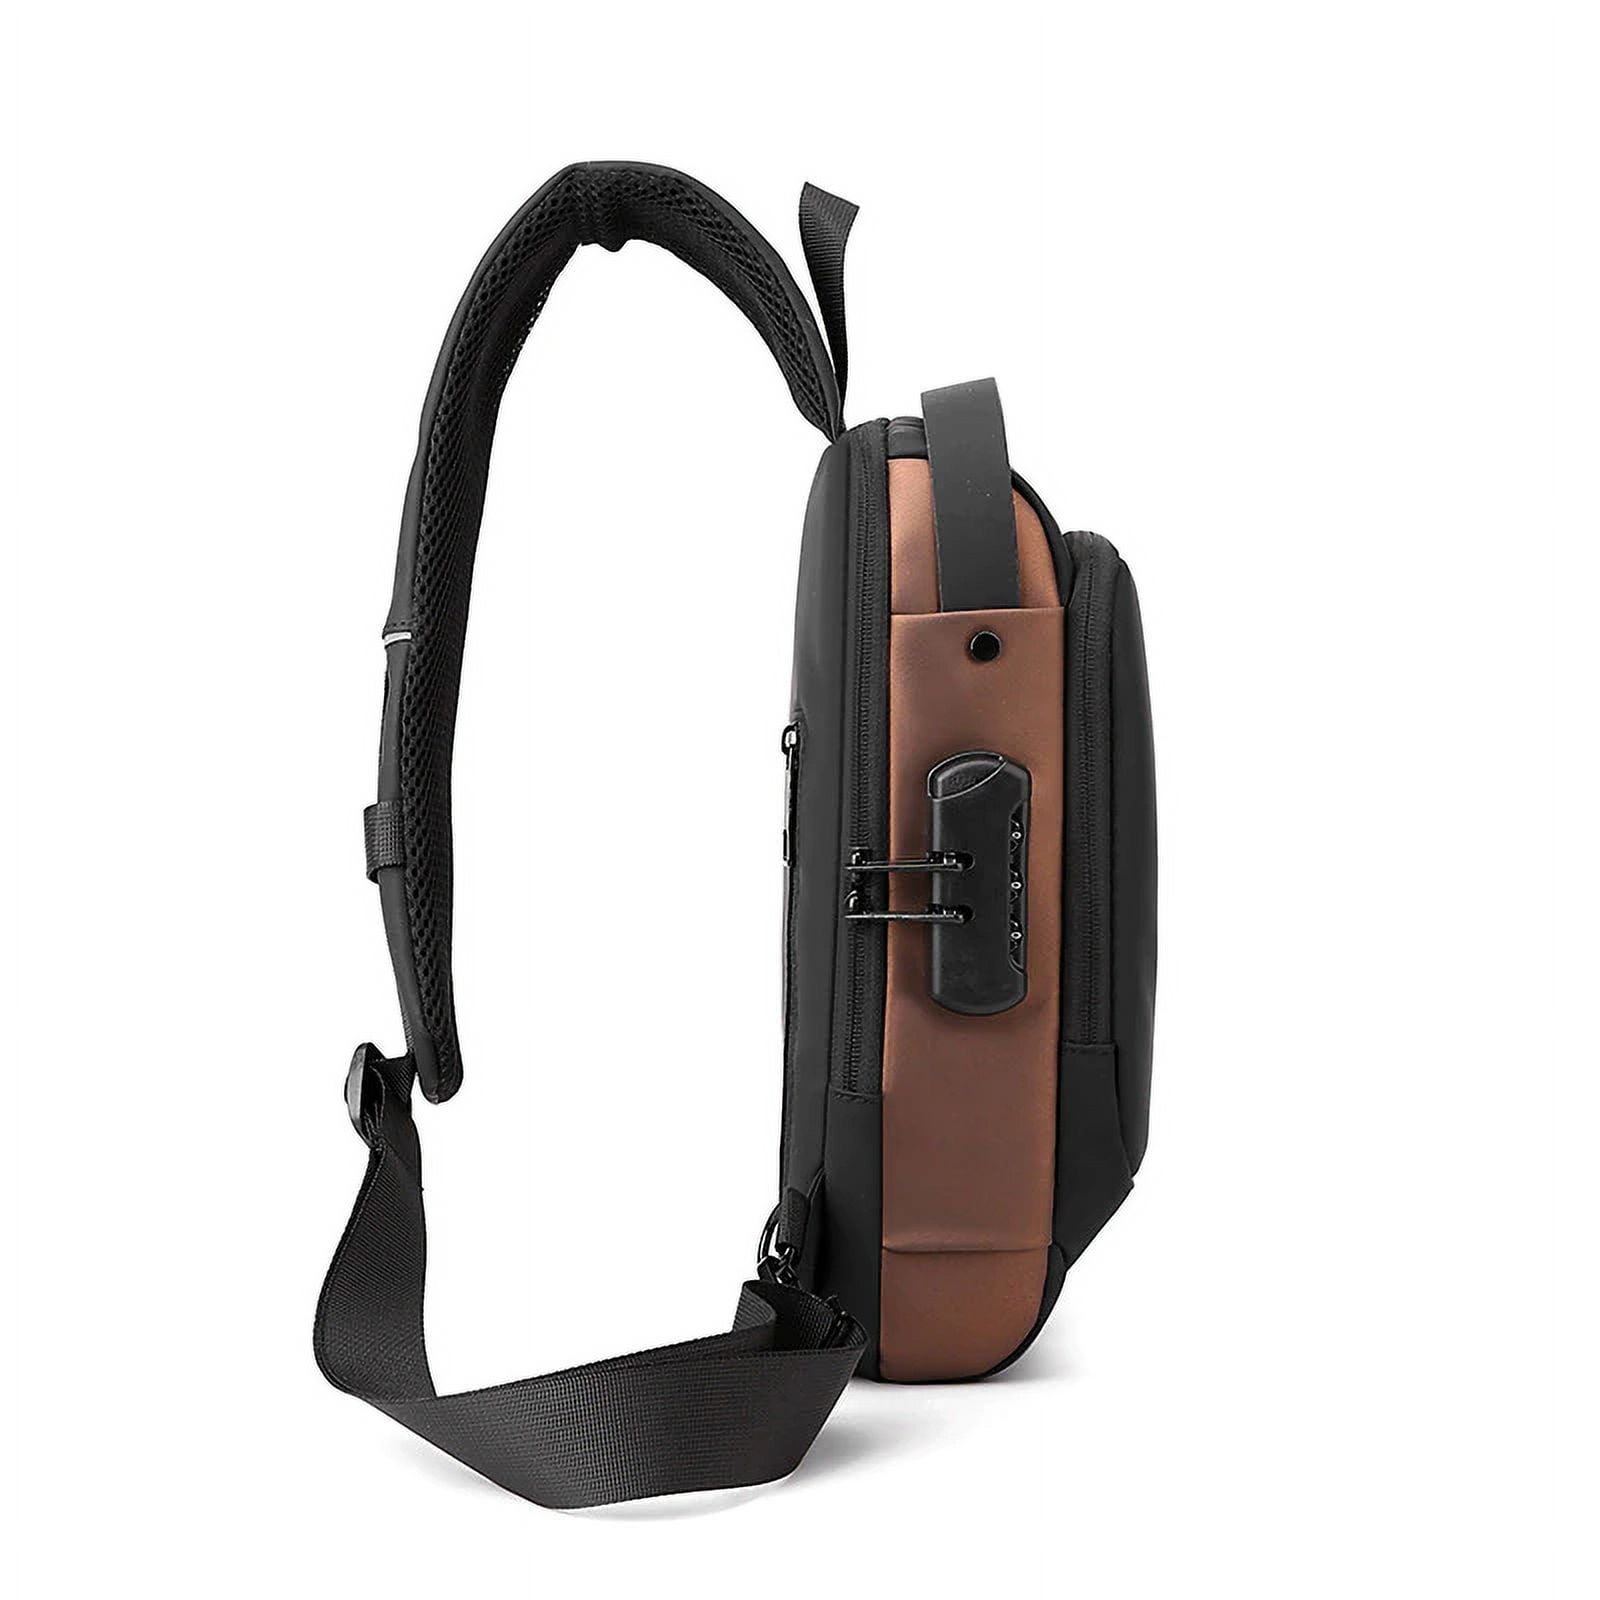 USB Charging Sport Sling Bag Male Anti-theft Chest Bag with Password Lock  Water Resistant Lightweight Shoulder Bag E2S